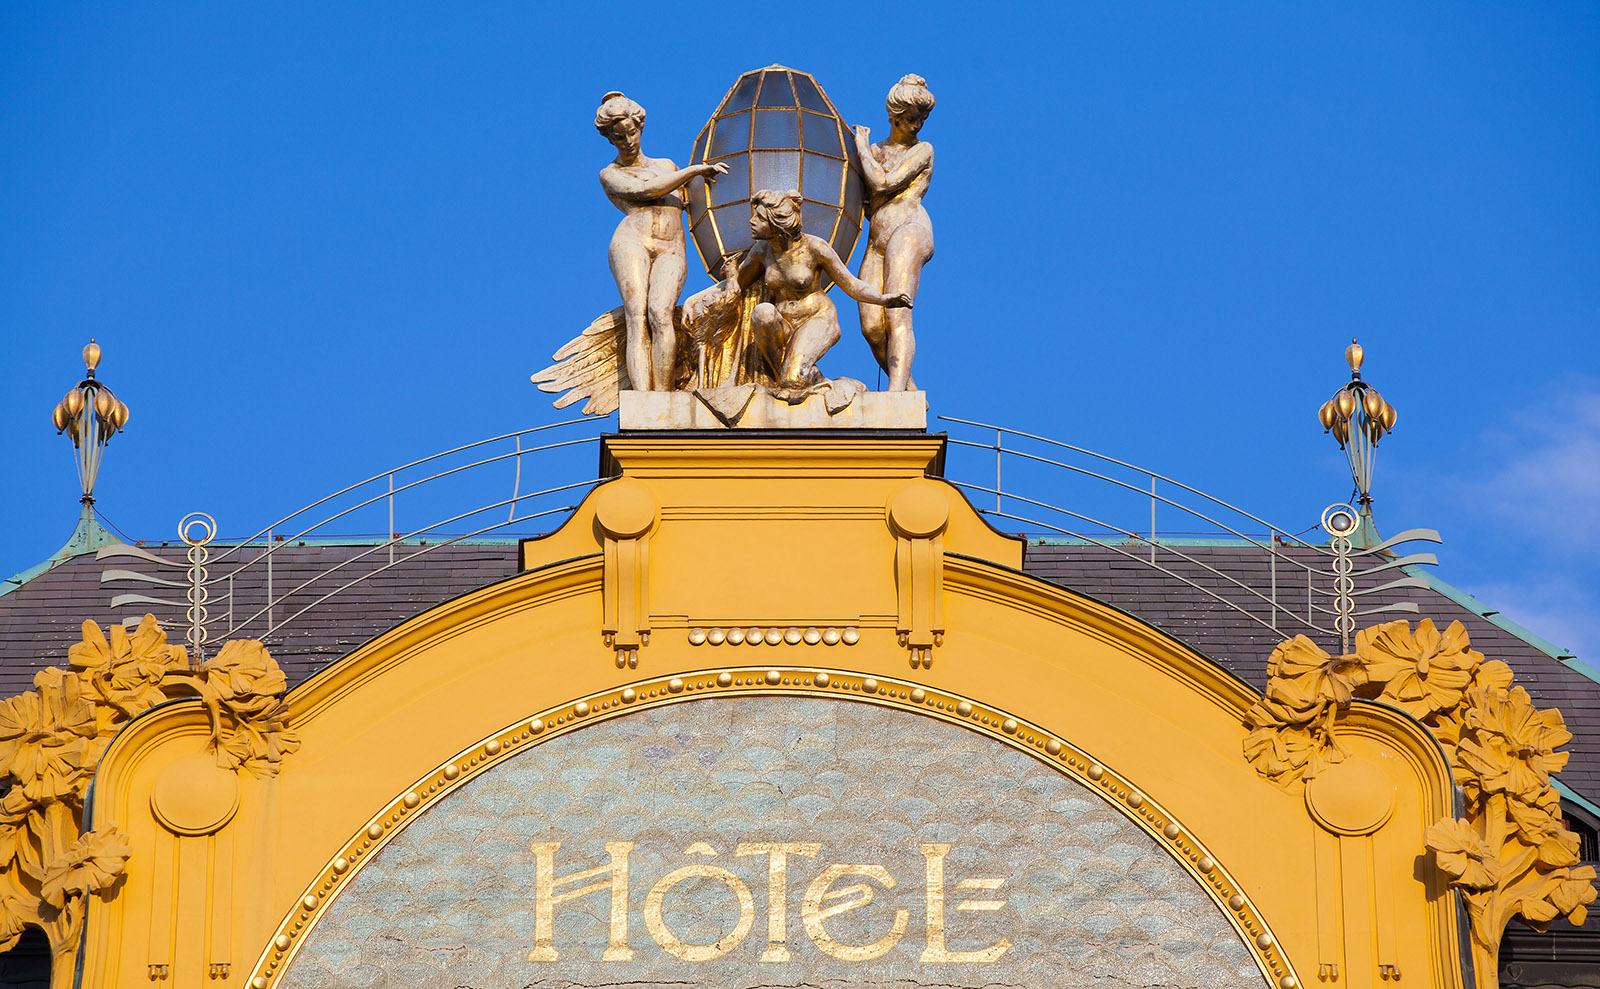 the facade of the hotel europa in prague against a blue sky